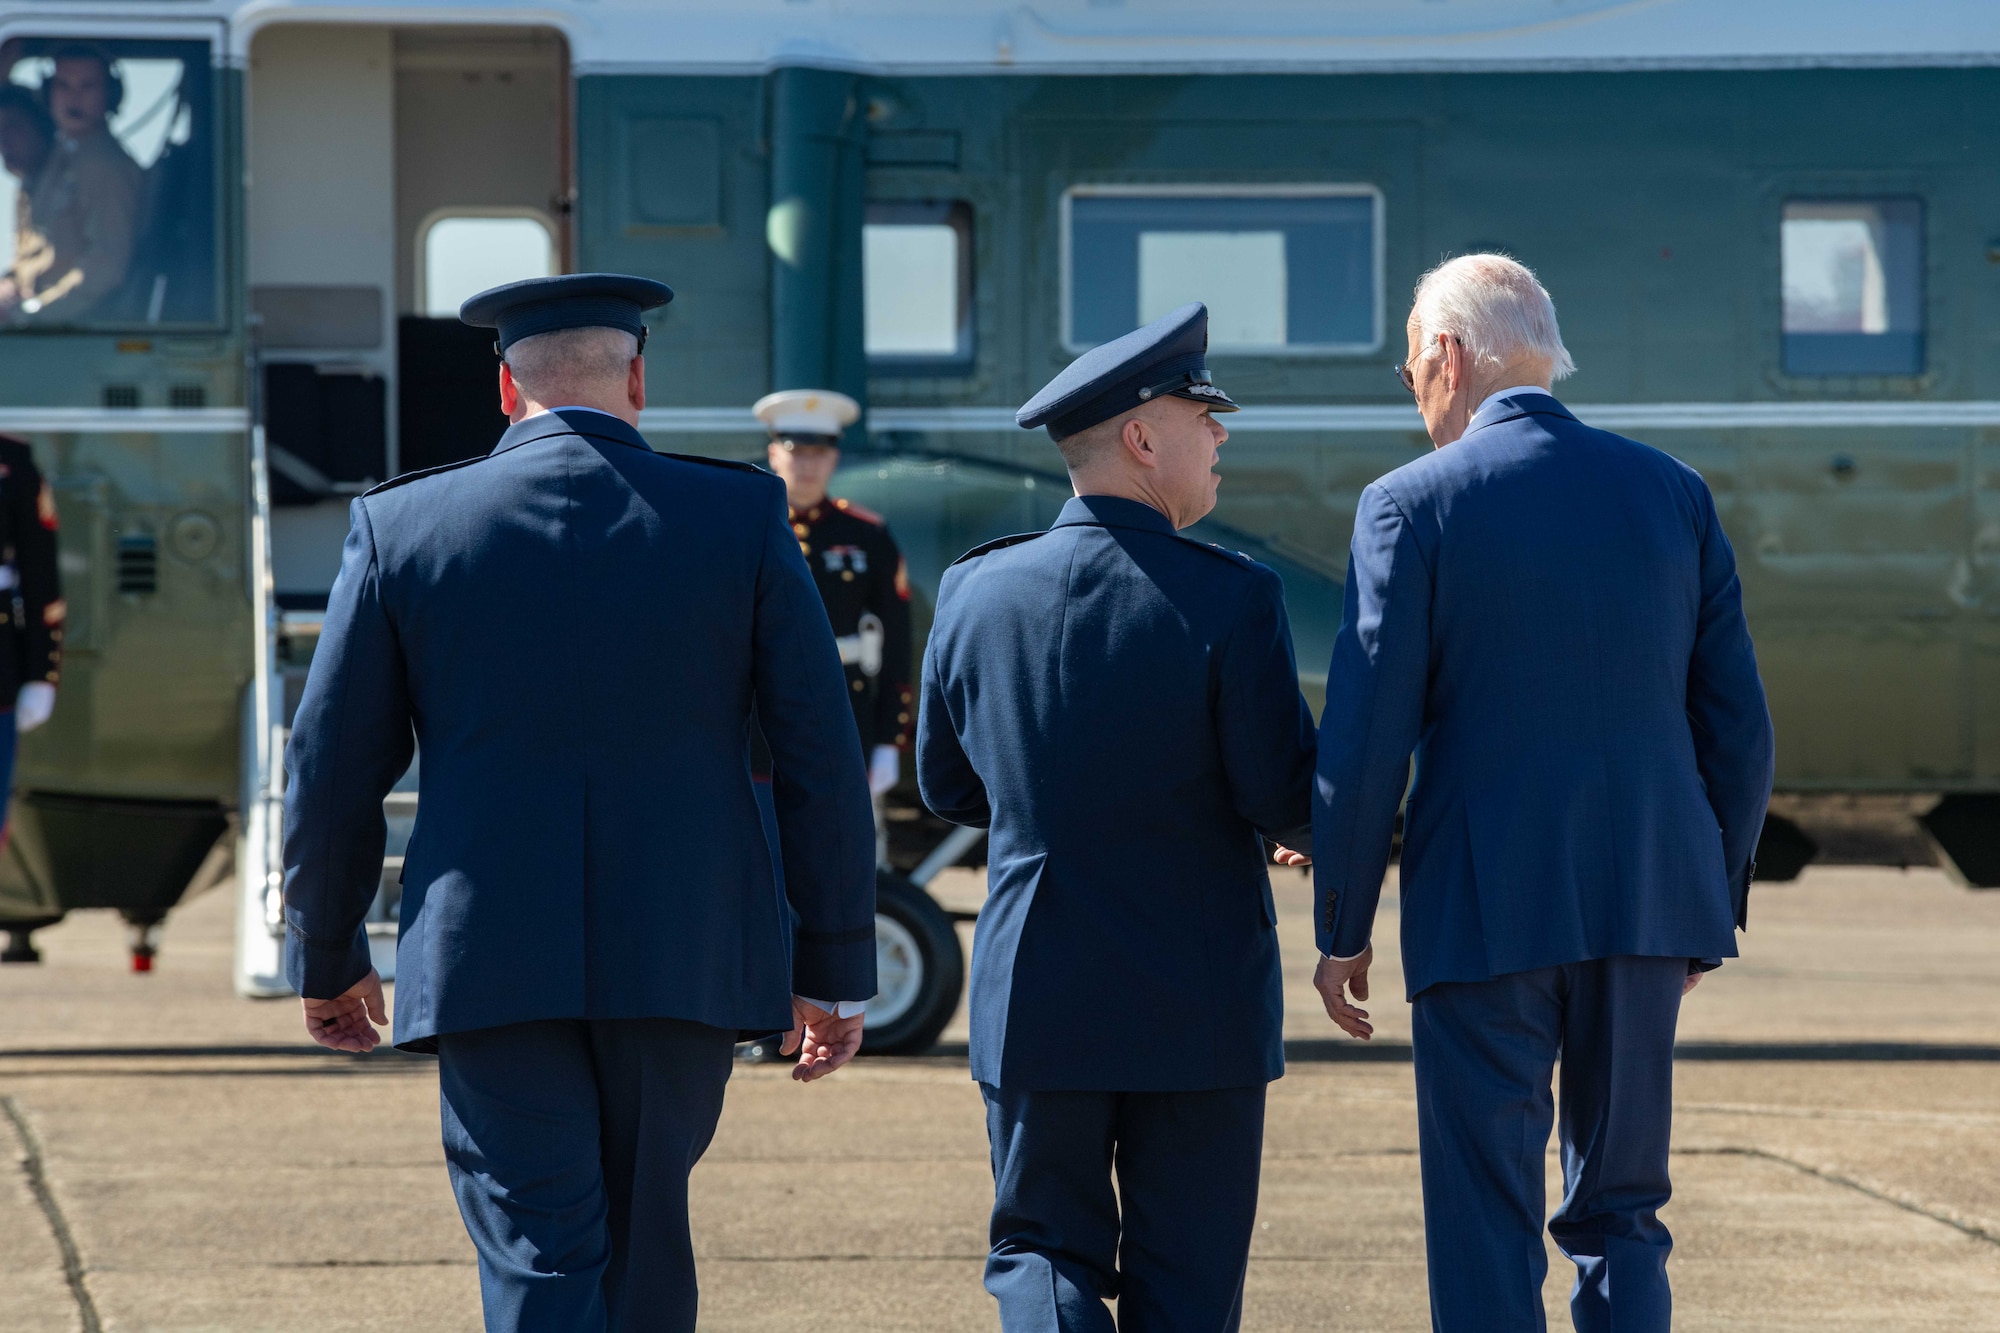 President Joe Biden greets Maj. Gen. William Holt and Col. Christopher Ledford at Maxwell Air Force Base, Mar. 5, 2023. Biden arrived at Maxwell in route to Selma to commemorate the 58th anniversary of Bloody Sunday.